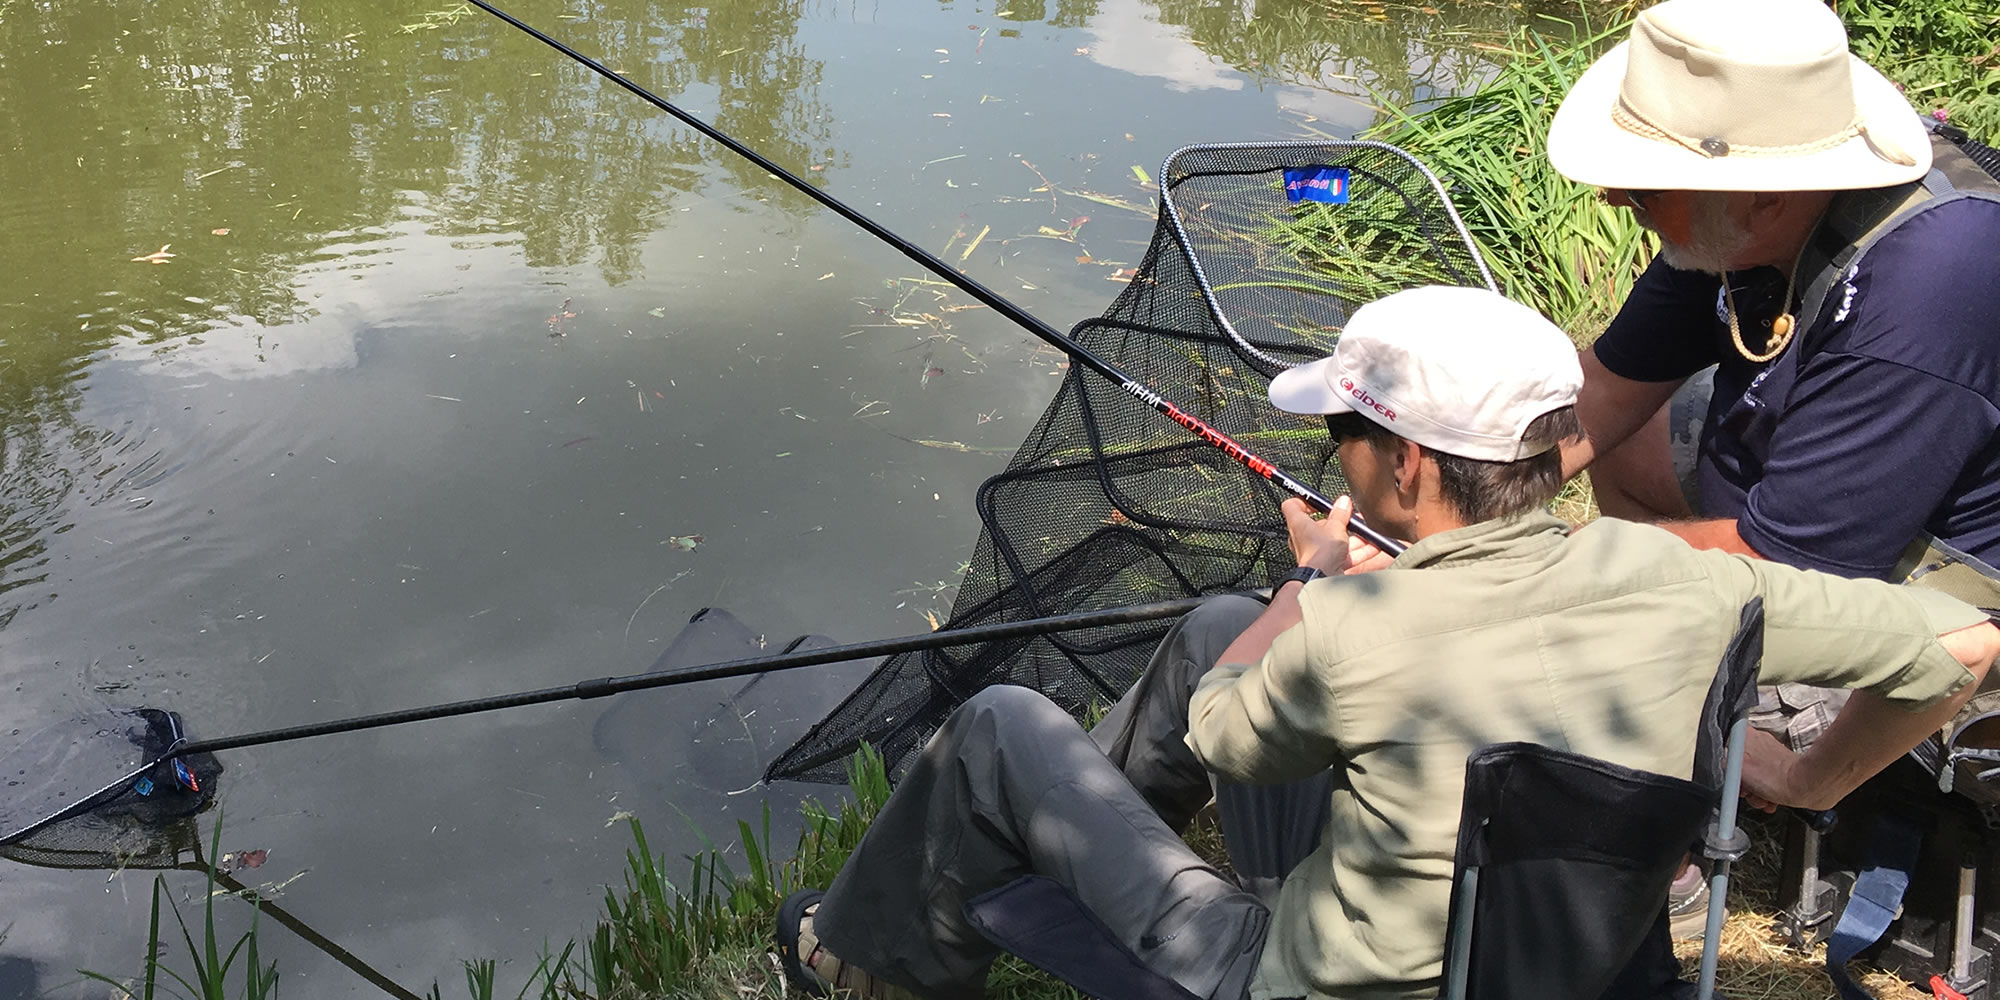 Male and coach coarse fishing at a Get Fishing beginner angling event